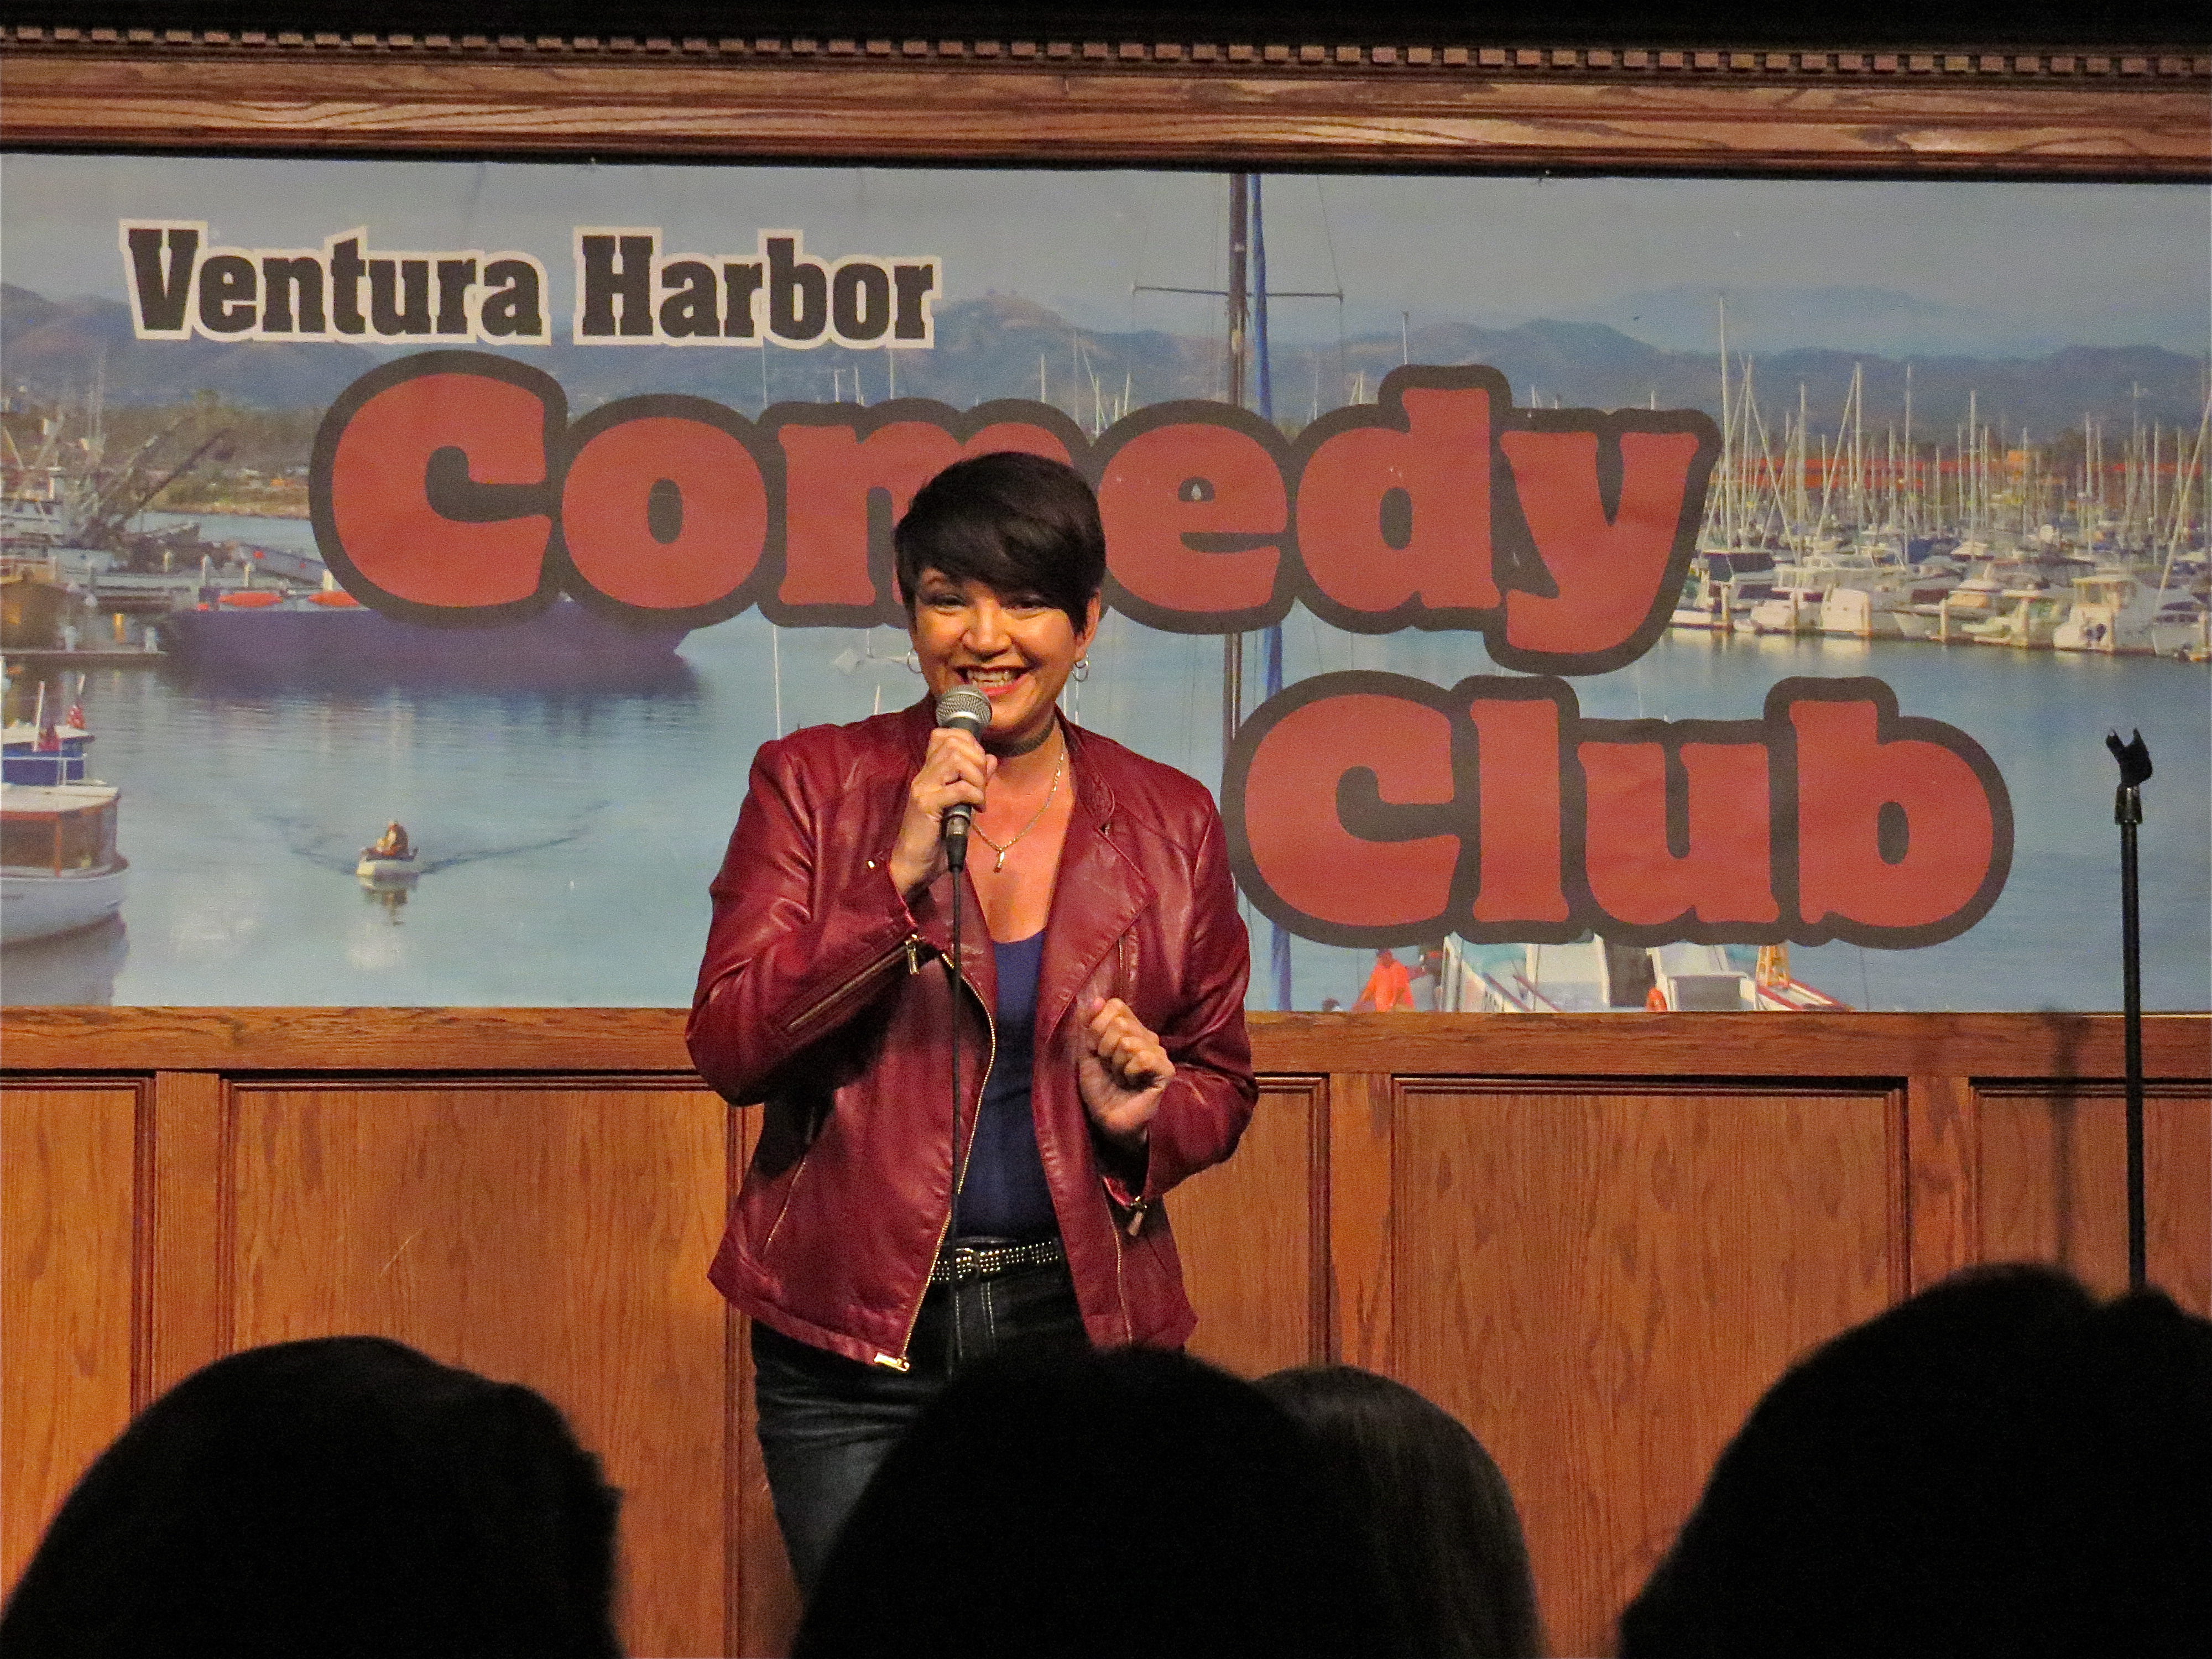 Denise Vasquez performing Stand Up Comedy & Music at Ventura Harbor Comedy Club October 21st, 2015